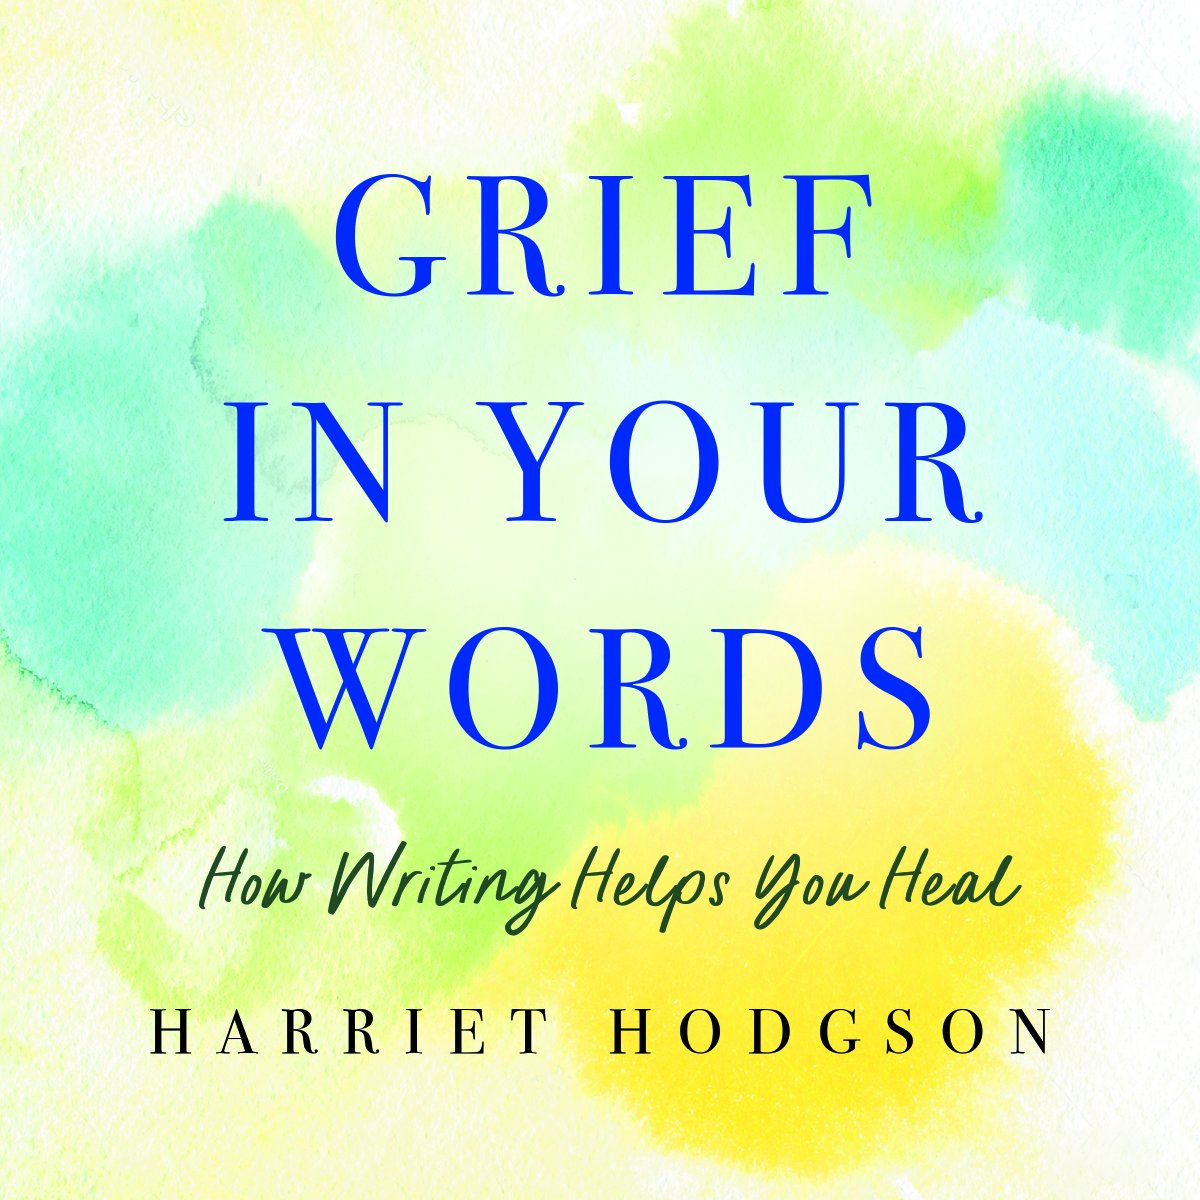 Coming soon! Grief in Your Words: How Writing Helps You Heal will be officially released on March 12th. It's an easy-to-read, helpful book with ideas that lead you toward your healing path.